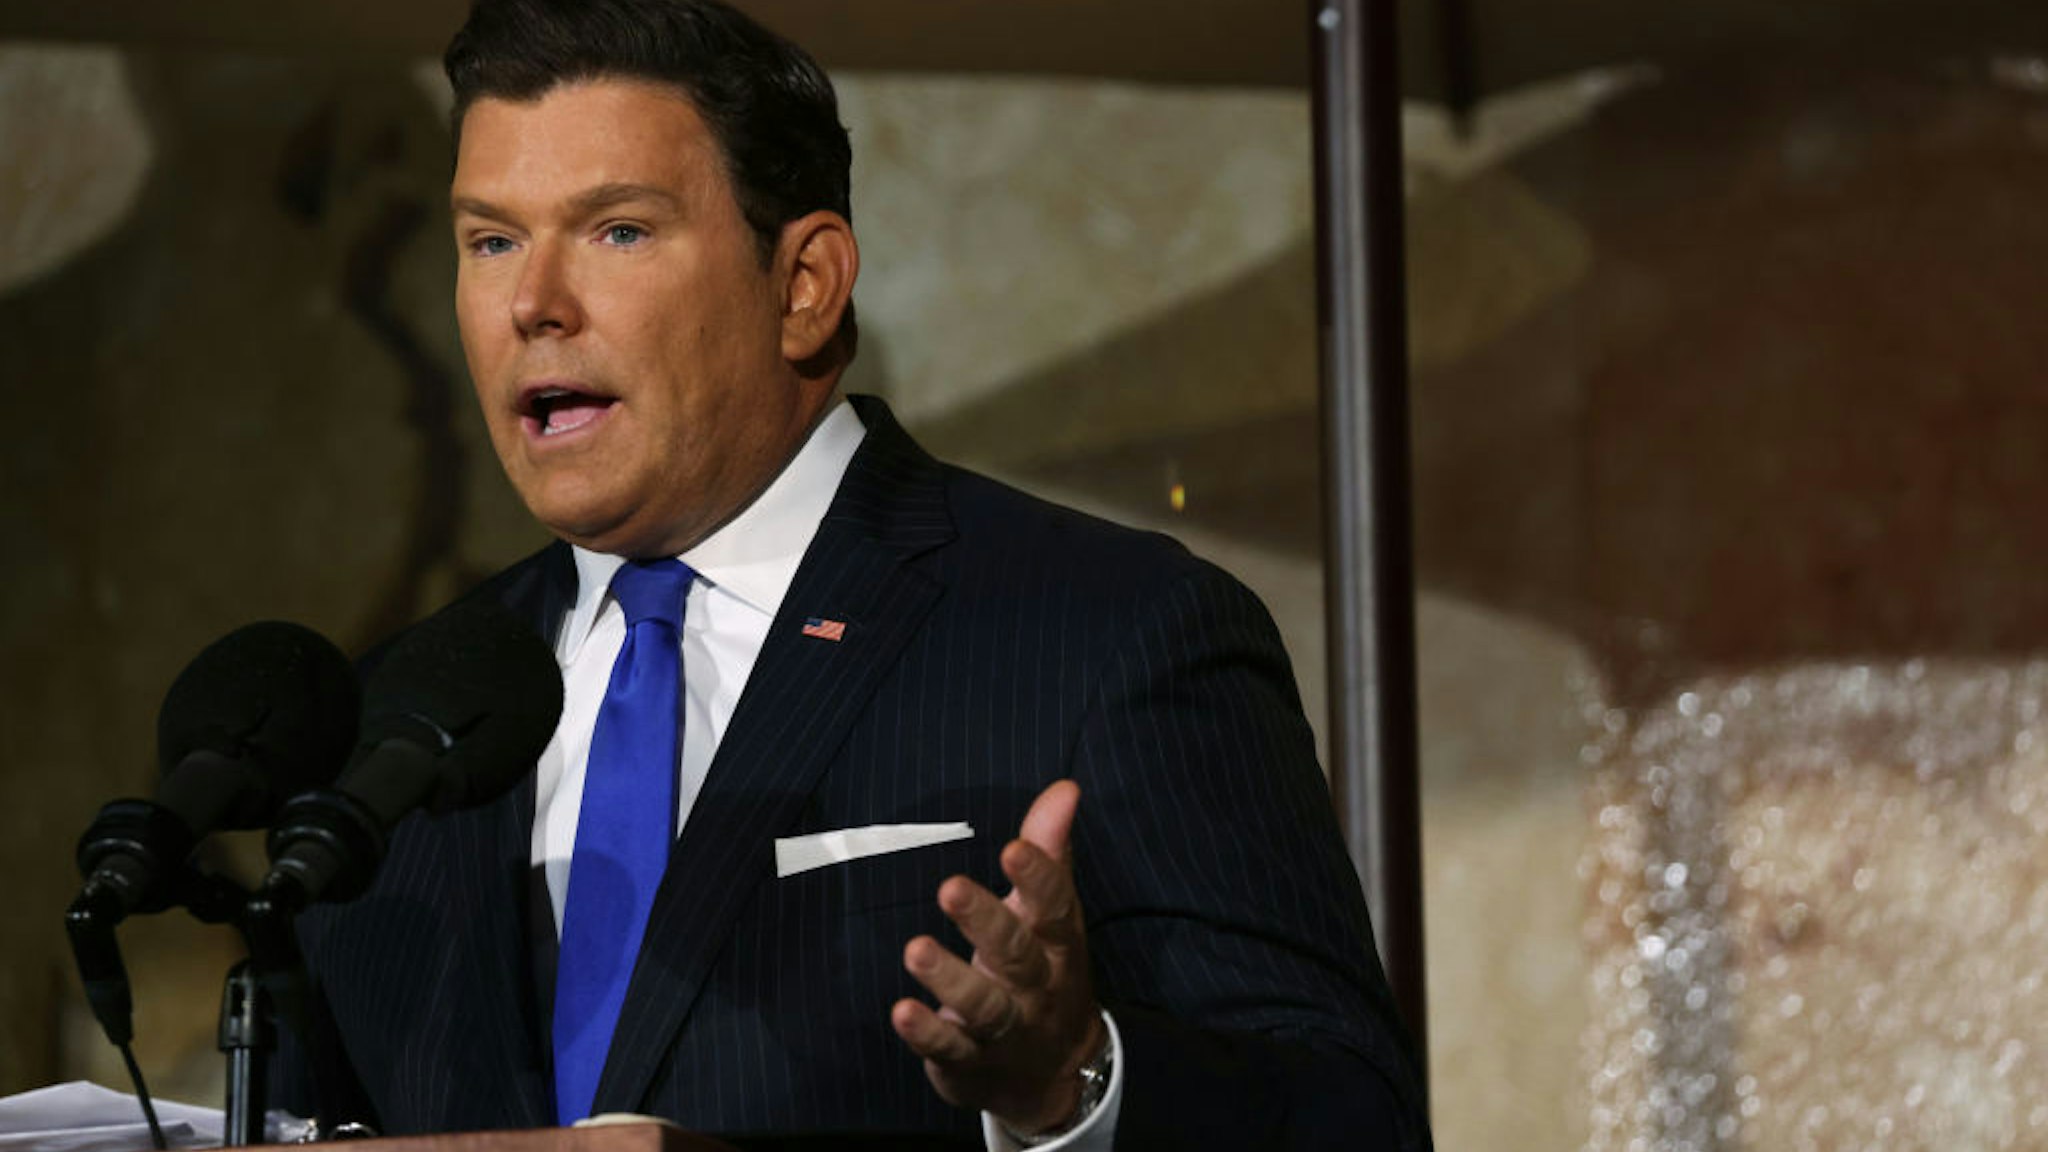 WASHINGTON, DC - SEPTEMBER 17: Fox News host Bret Baier speaks during a dedication ceremony for The Dwight D. Eisenhower Memorial September 17, 2020 in Washington, DC. The memorial, commissioned by Congress in 1999, honors the legacy of the former president and World War II supreme allied commander. (Photo by Alex Wong/Getty Images)